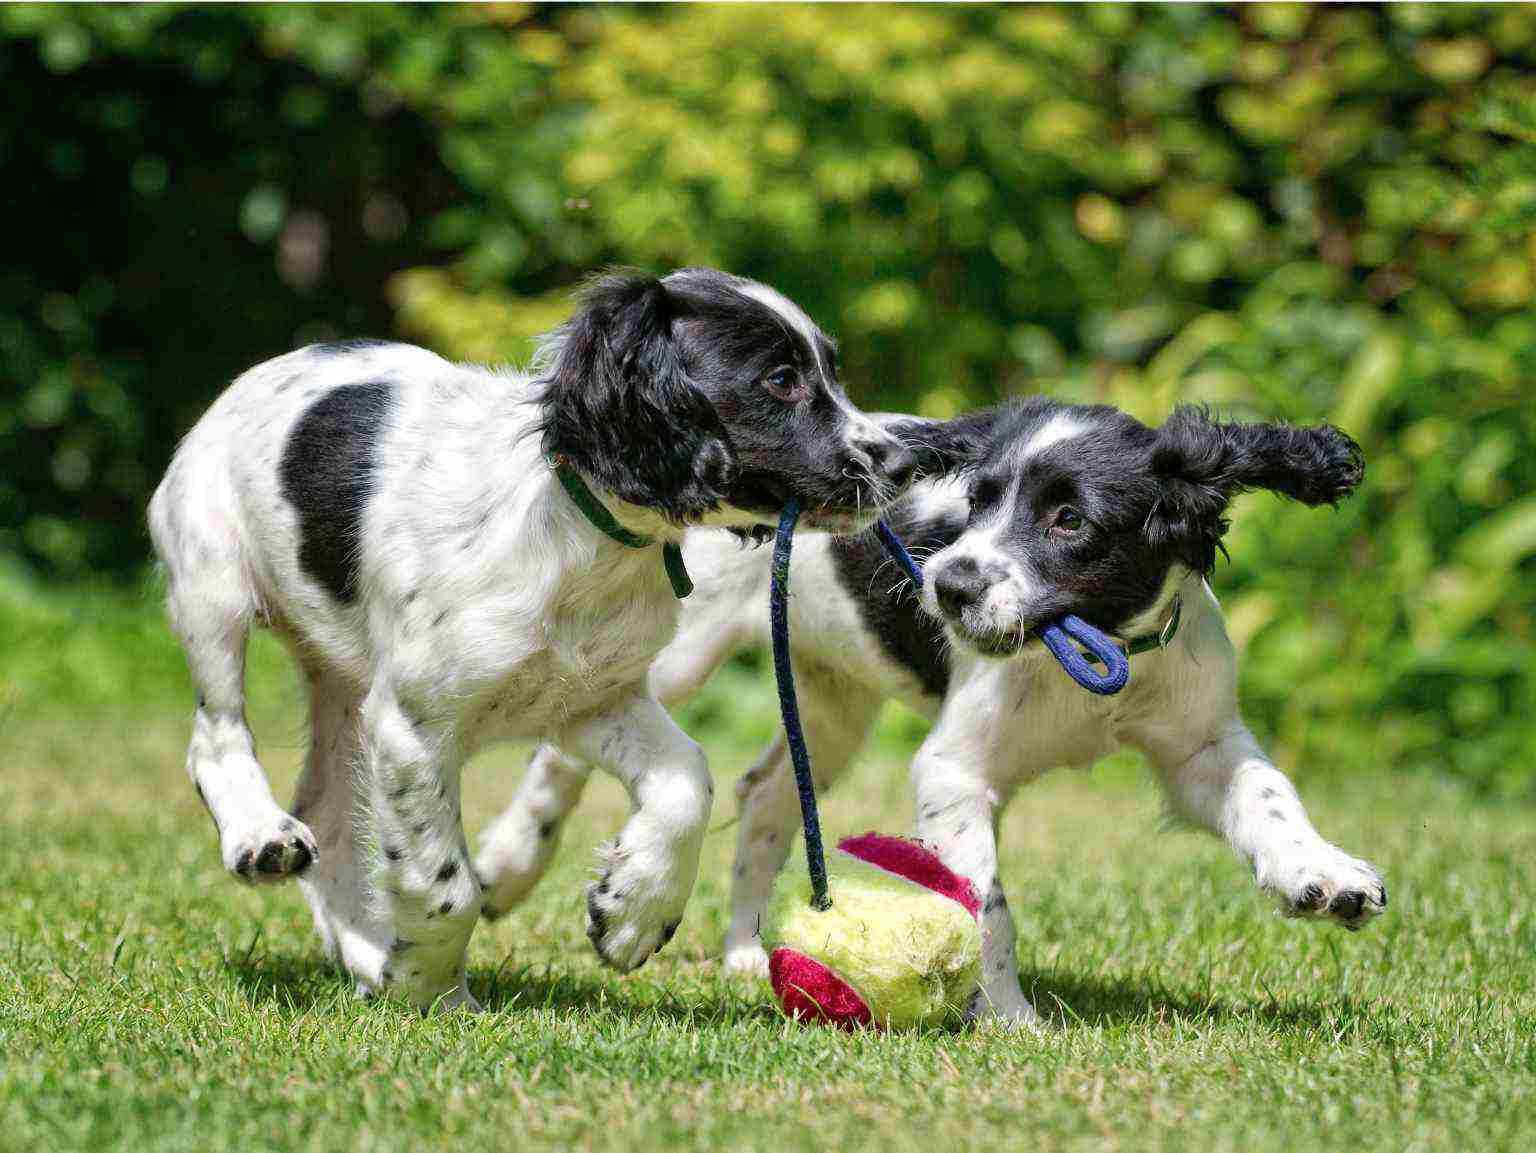 Two puppies playing with a rope toy